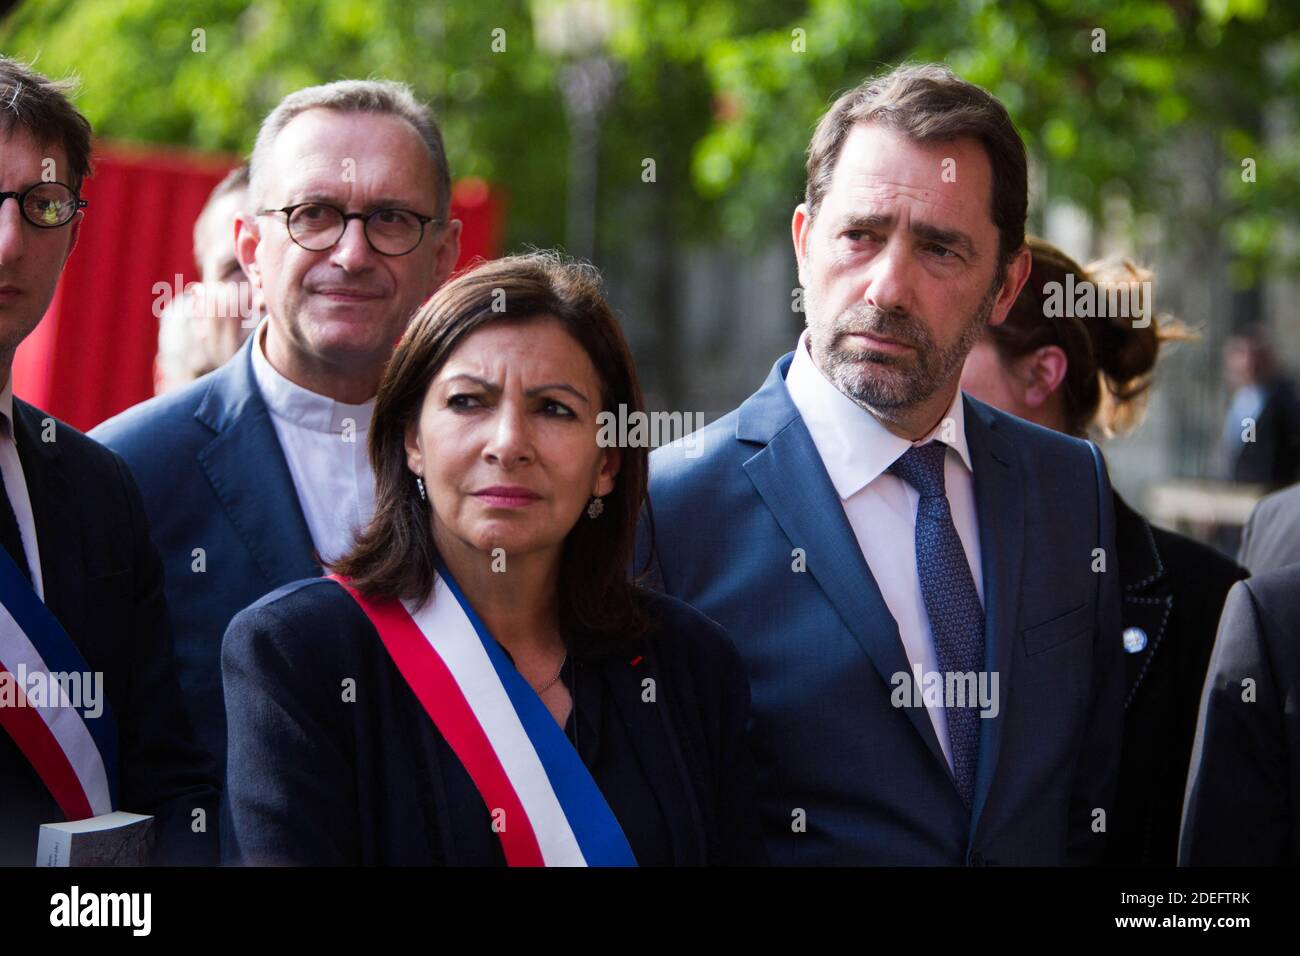 French Interior Minister Christophe Castaner, Paris prefect Didier Lallement, Paris mayor Anne Hidalgo, and other officials walk by Notre Dame cathedral on April 18, 2019 in Paris. France paid a daylong tribute on April 18, 2019 to the Paris firefighters who saved Notre Dame Cathedral from collapse, while construction workers rushed to secure an area above one of the church's famed rose-shaped windows and other vulnerable sections of the fire-damaged landmark. Photo by Raphael Lafargue/ABACAPRESS.COM Stock Photo